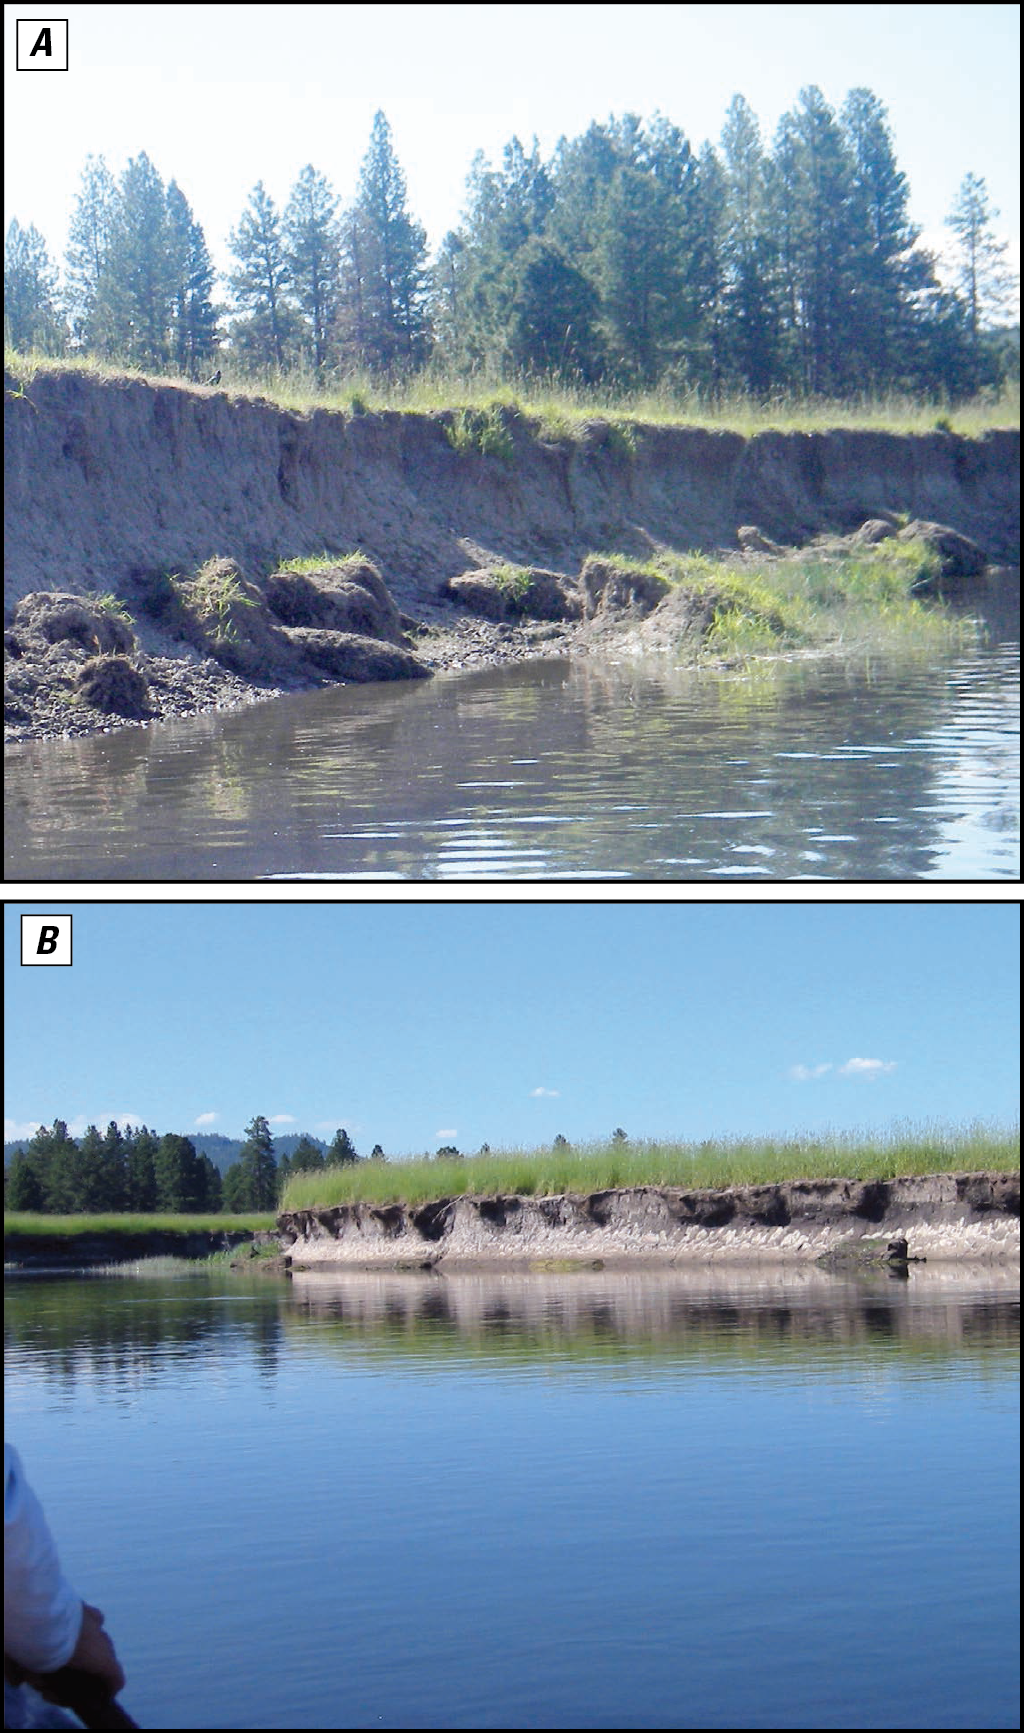 Examples of bank erosion